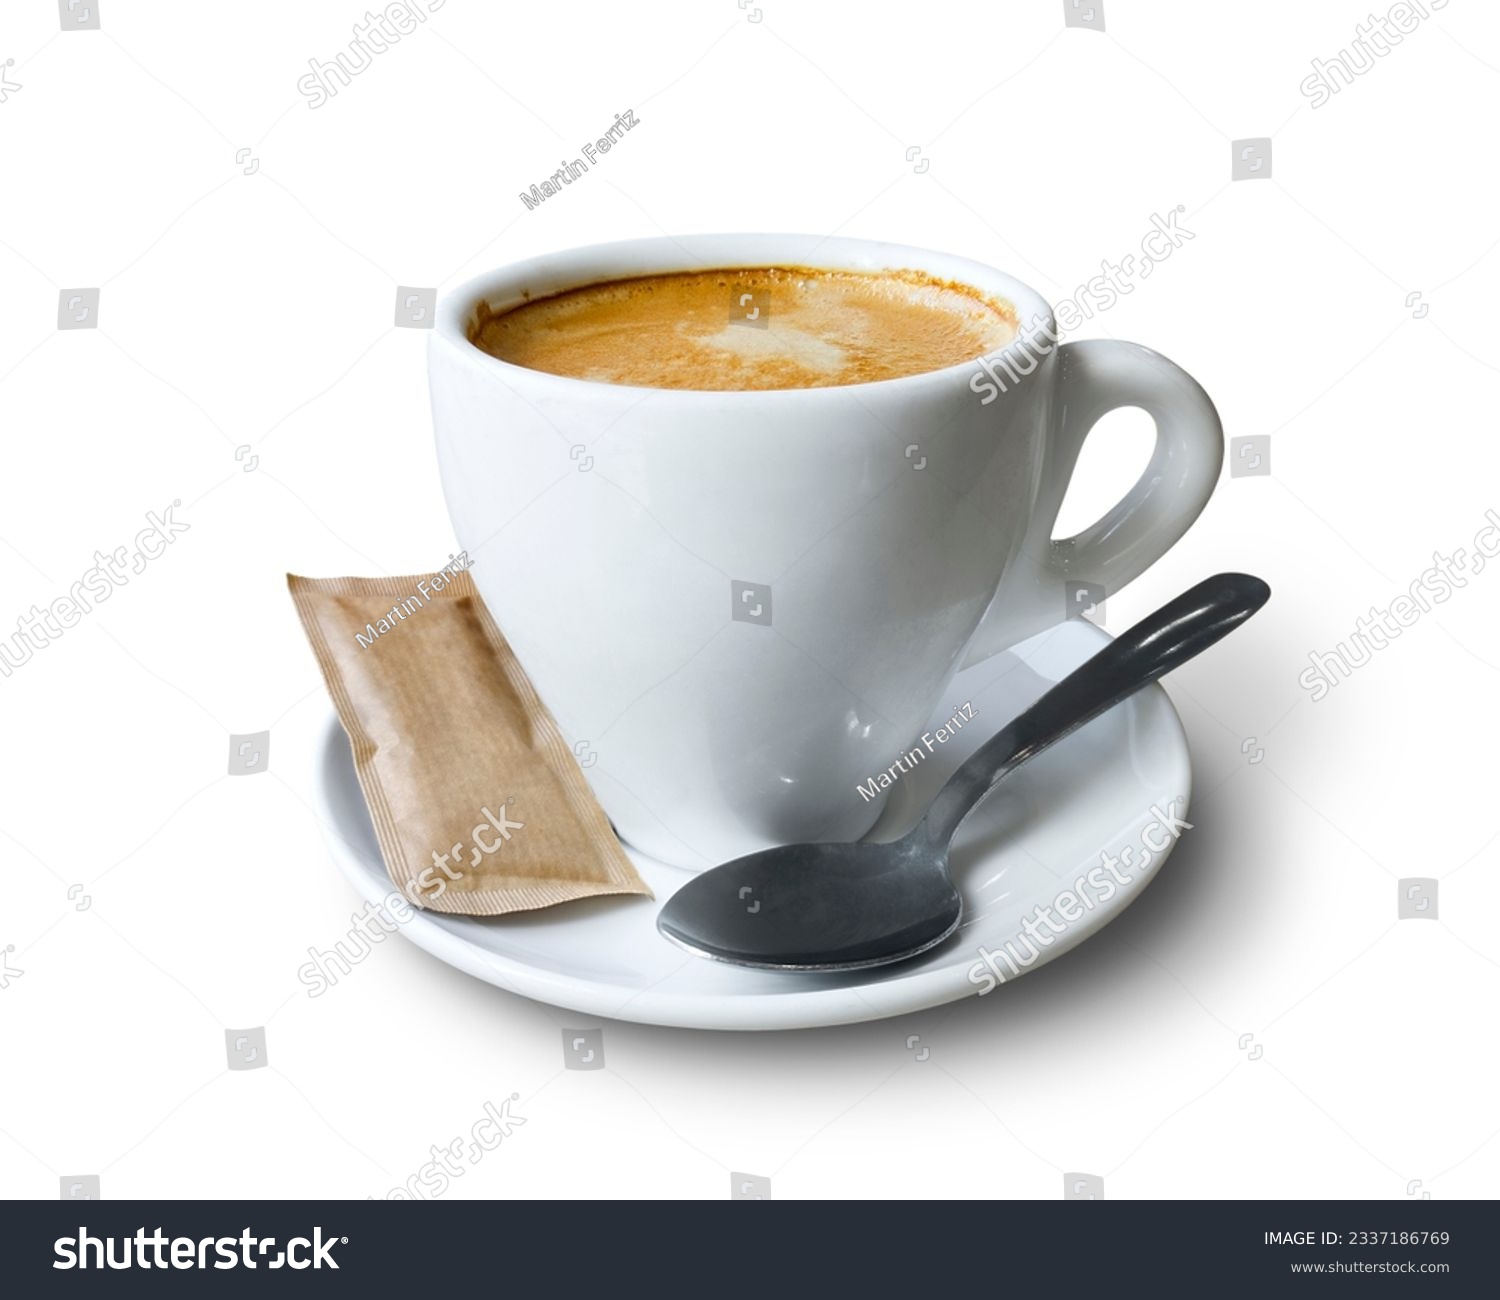 Coffee cup with saucer, teaspoon and a pack of brown sugar isolated on empty background #2337186769